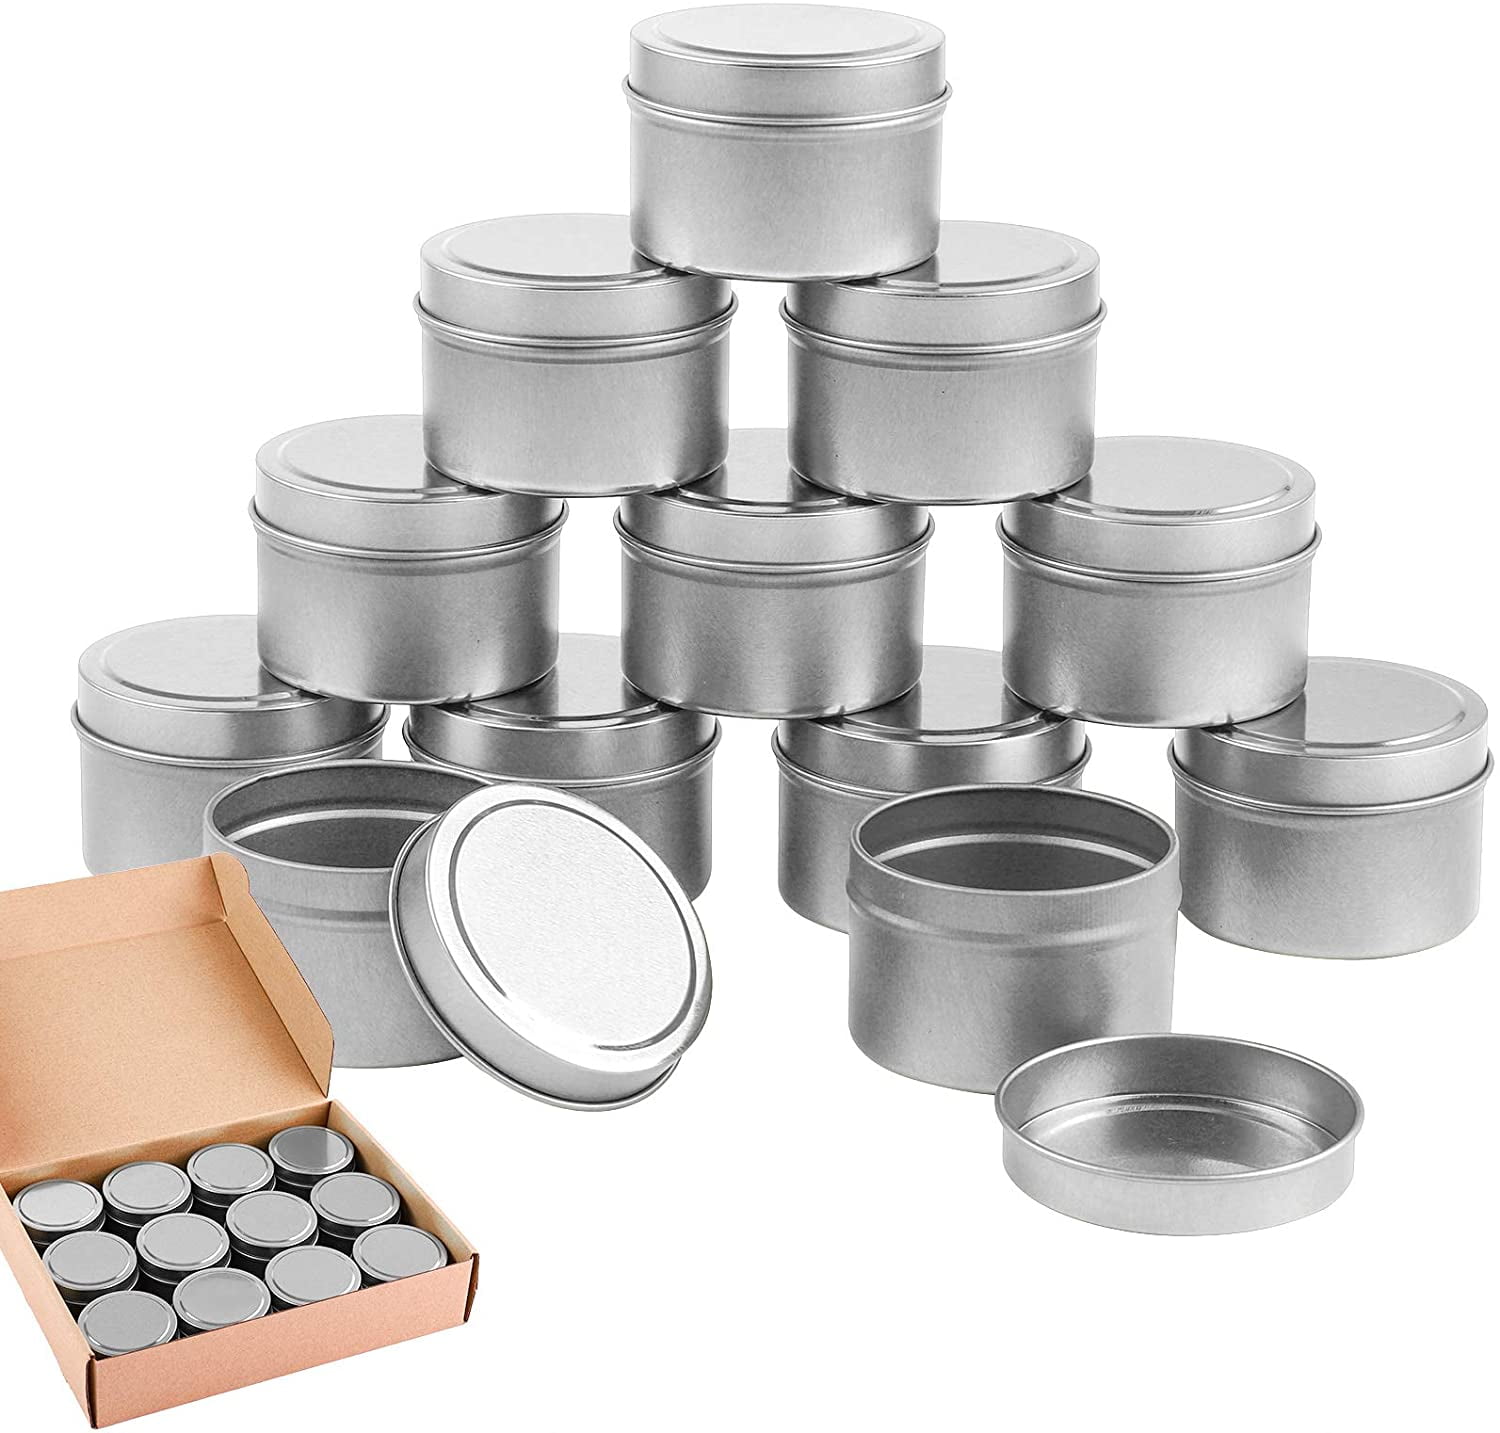 Details about   12Pcs Mini Storage Boxes Tins Candy Jars Cans Containers w/Lids for Candle DIY 